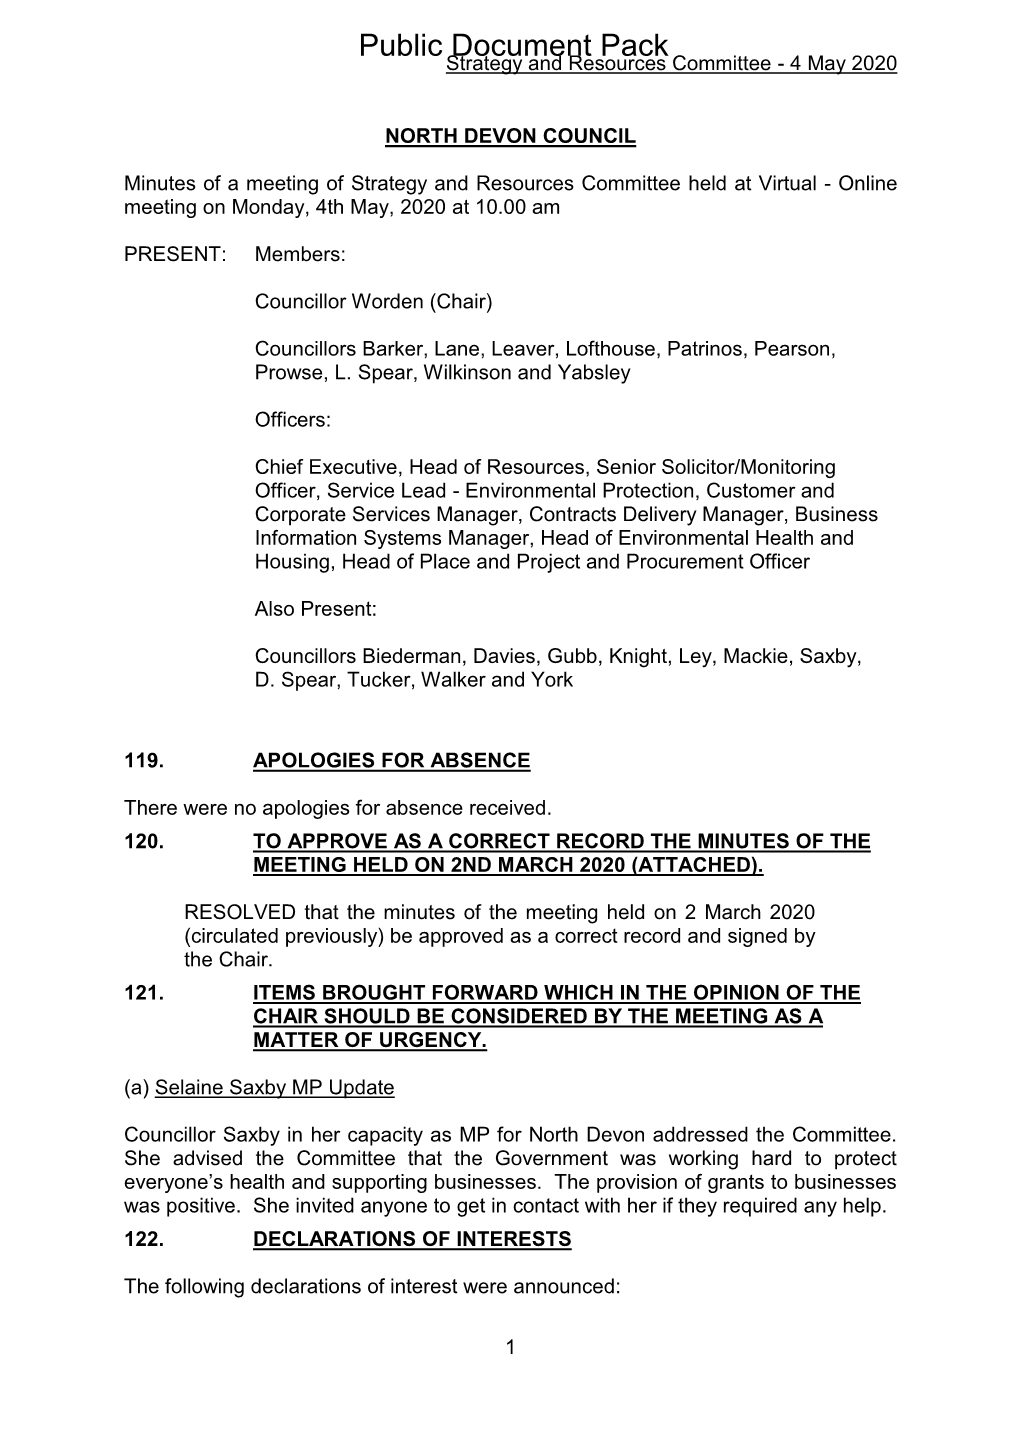 (Public Pack)Minutes Document for Strategy and Resources Committee, 04/05/2020 10:00